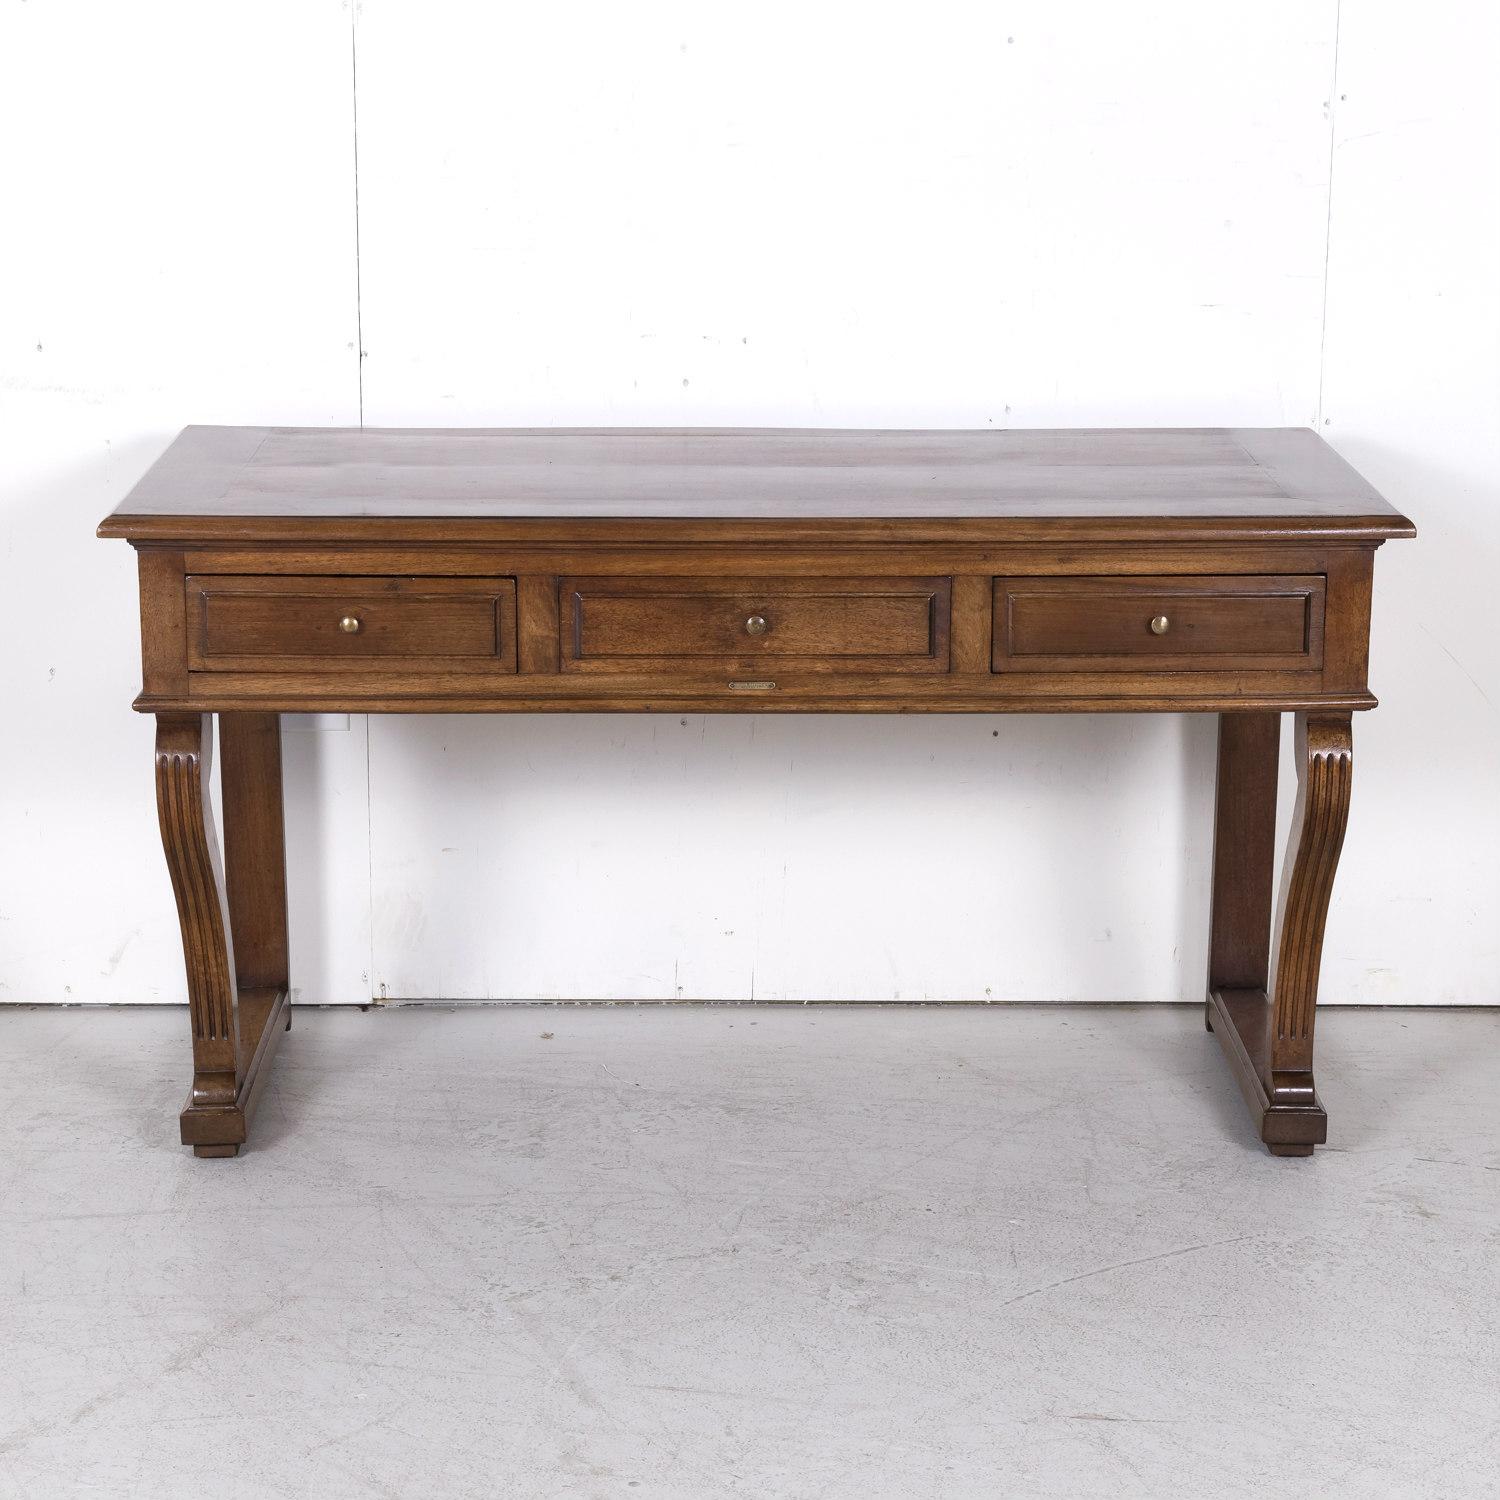 Early 19th Century 19th C. French Charles X Period Walnut Console w/Drawers for Vachon-Bavoux & Cie For Sale